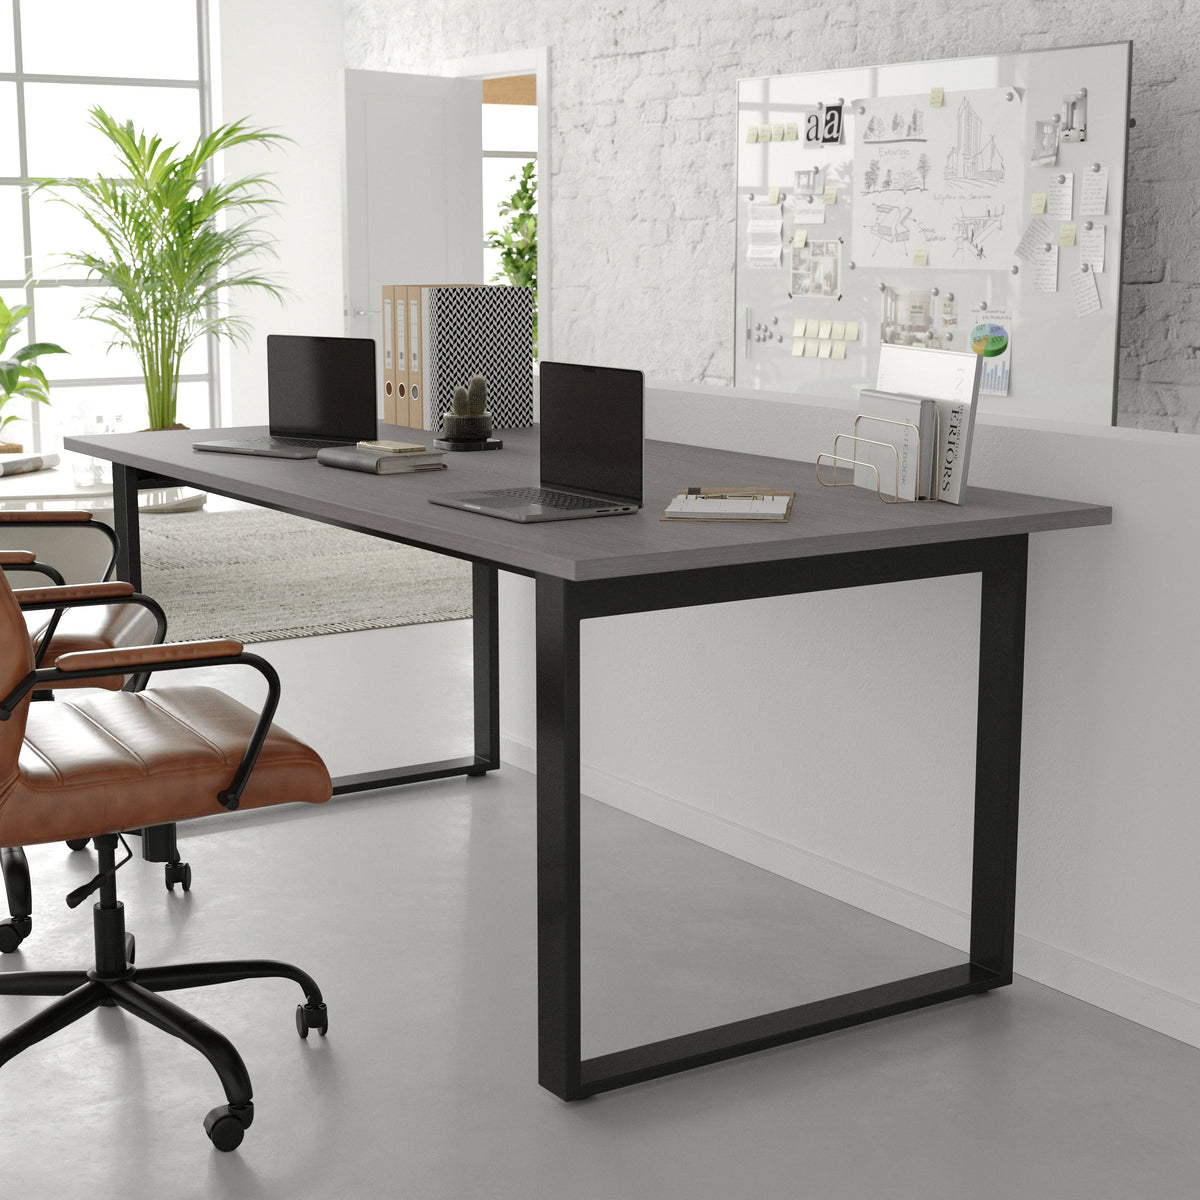 Gray Oak |#| Commercial 72x36 Conference Table with Laminate Top and U-Frame Base - Gray Oak